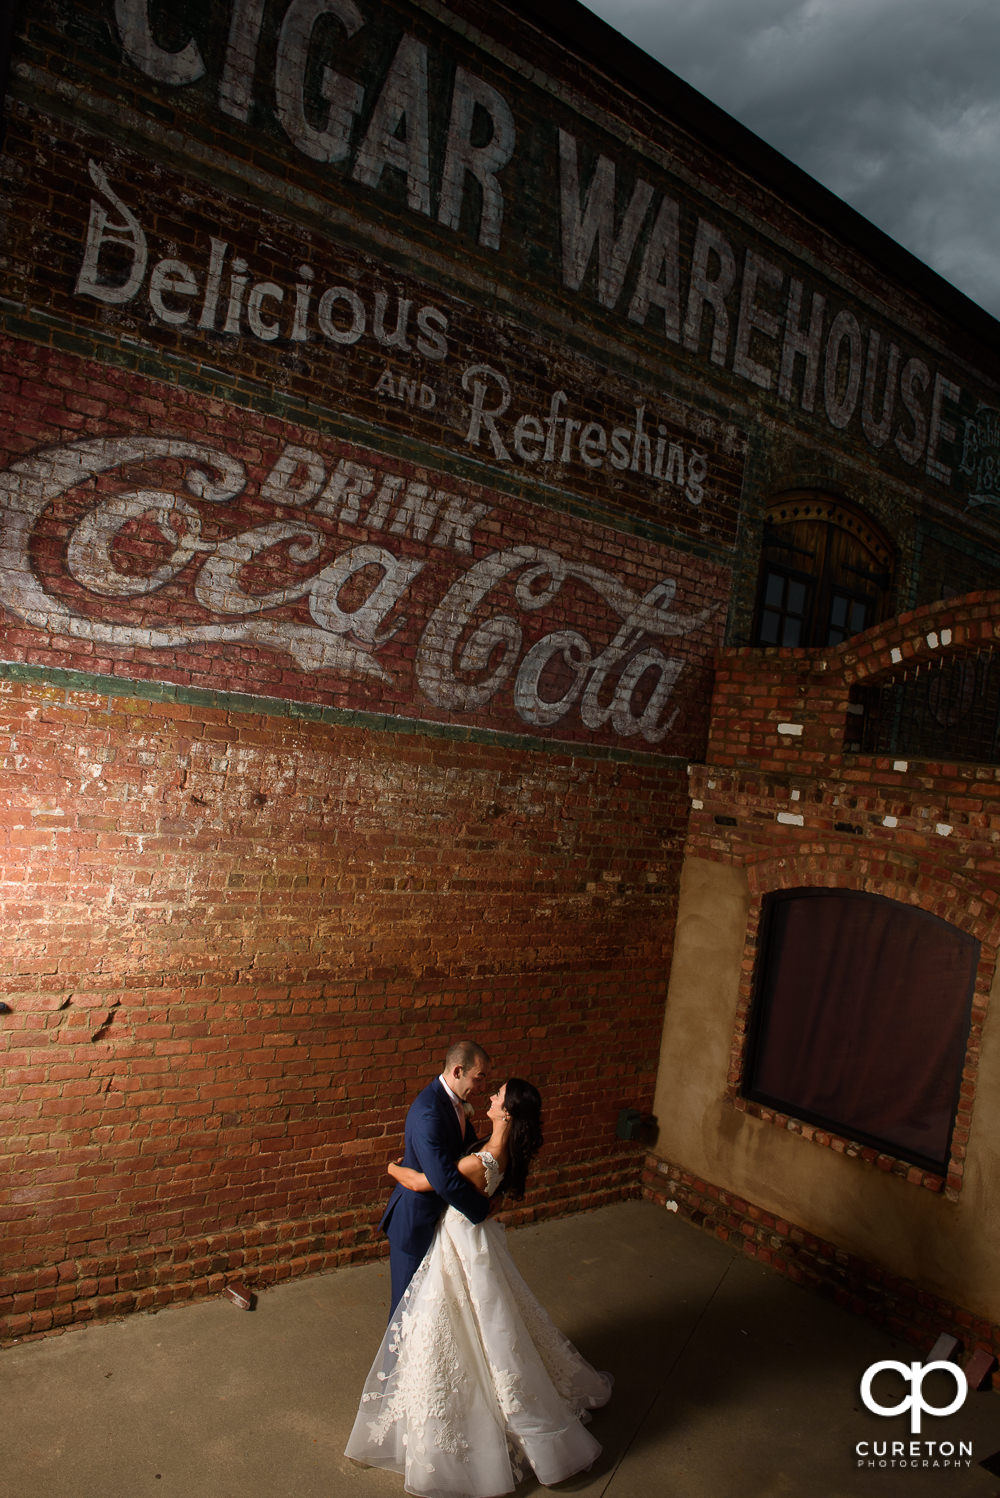 Epic photo of a bride and groom dancing under the sign at Old Cigar Warehouse.